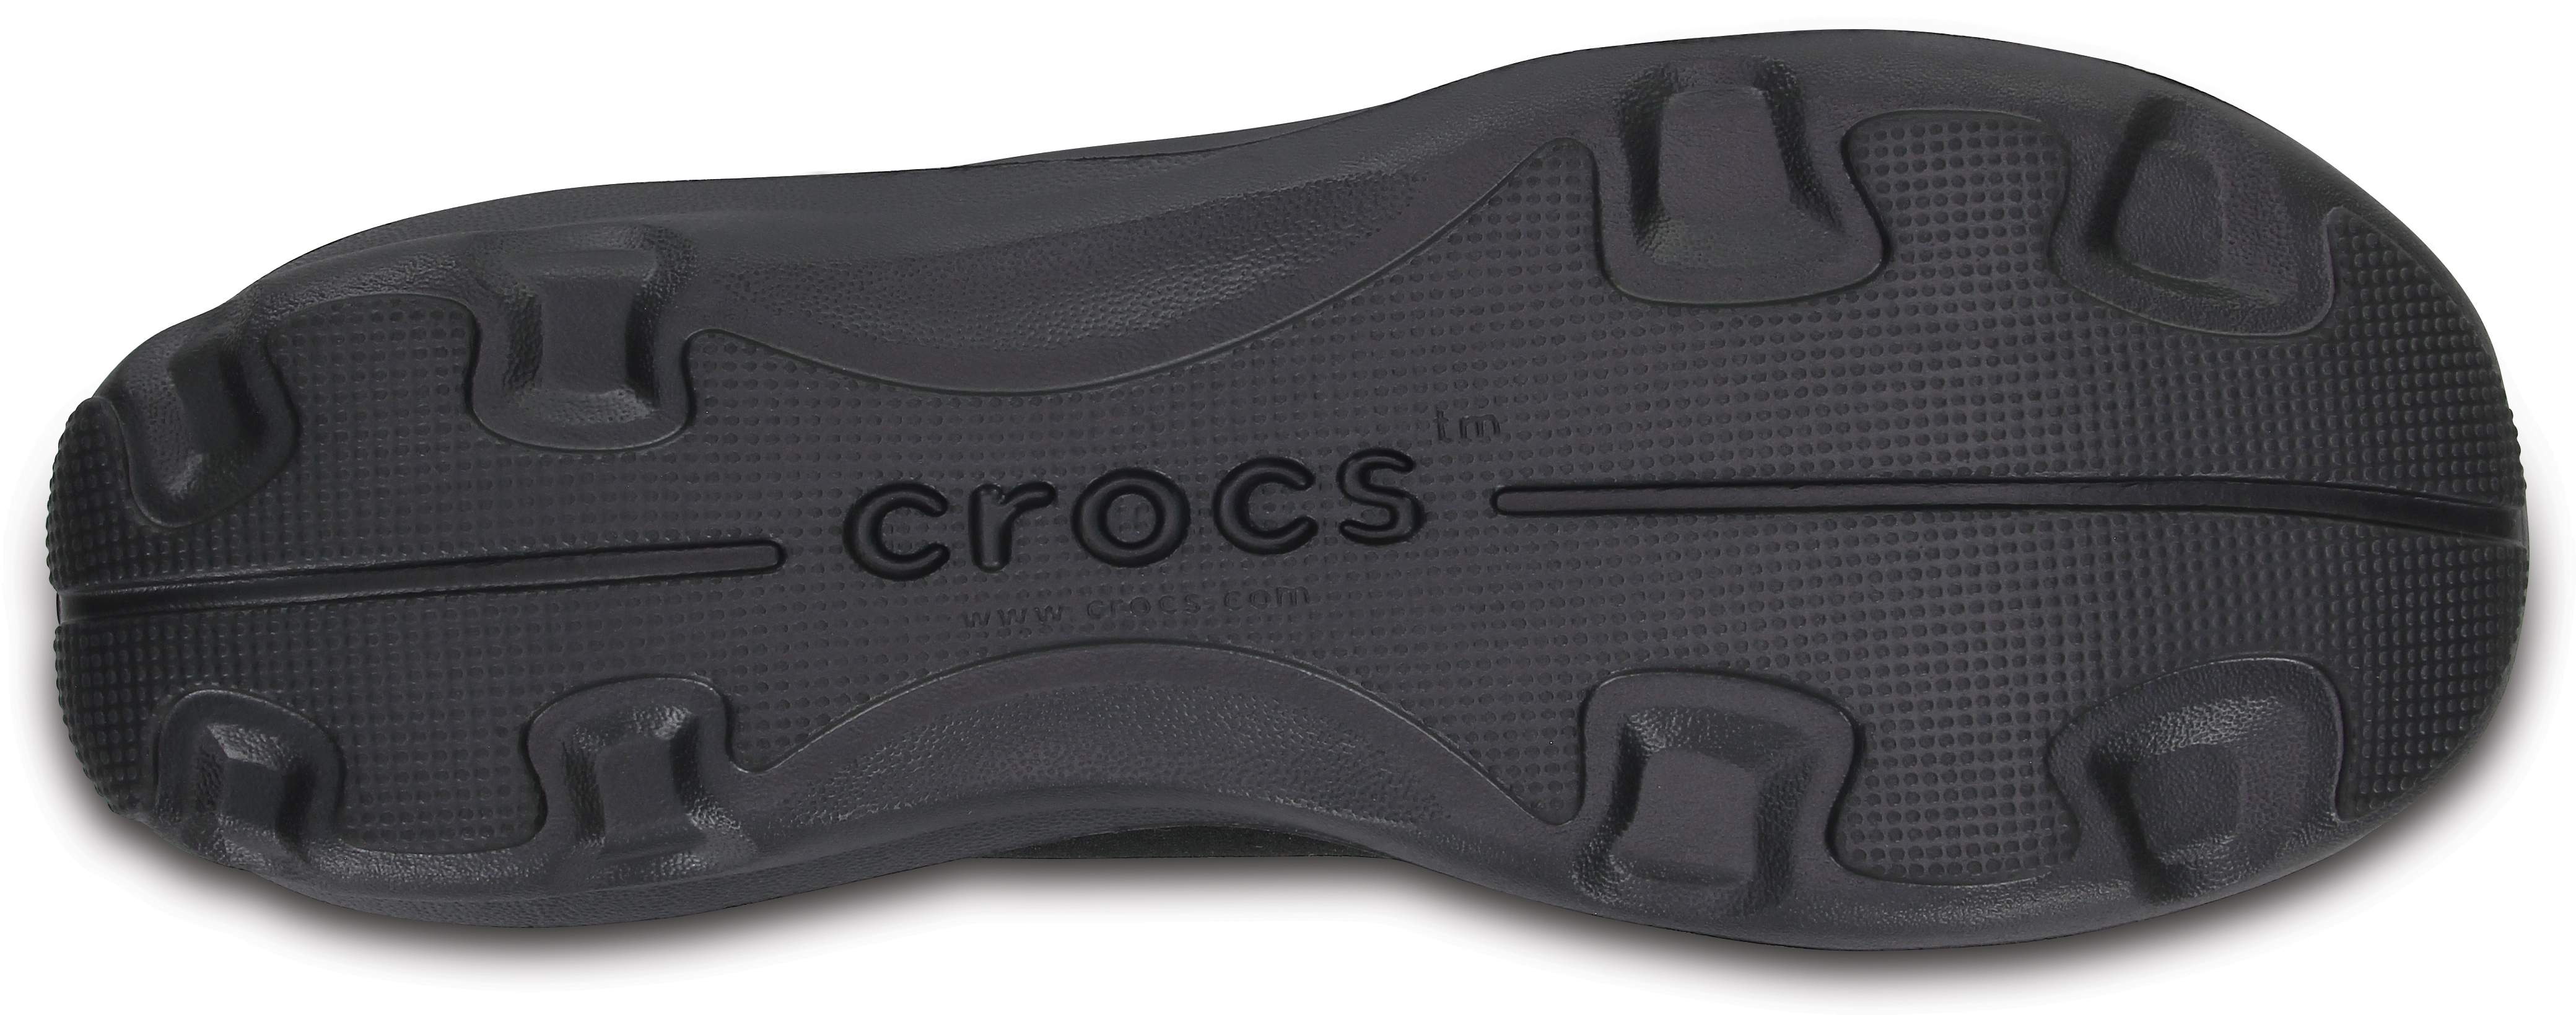 crocs busy day stretch lace up